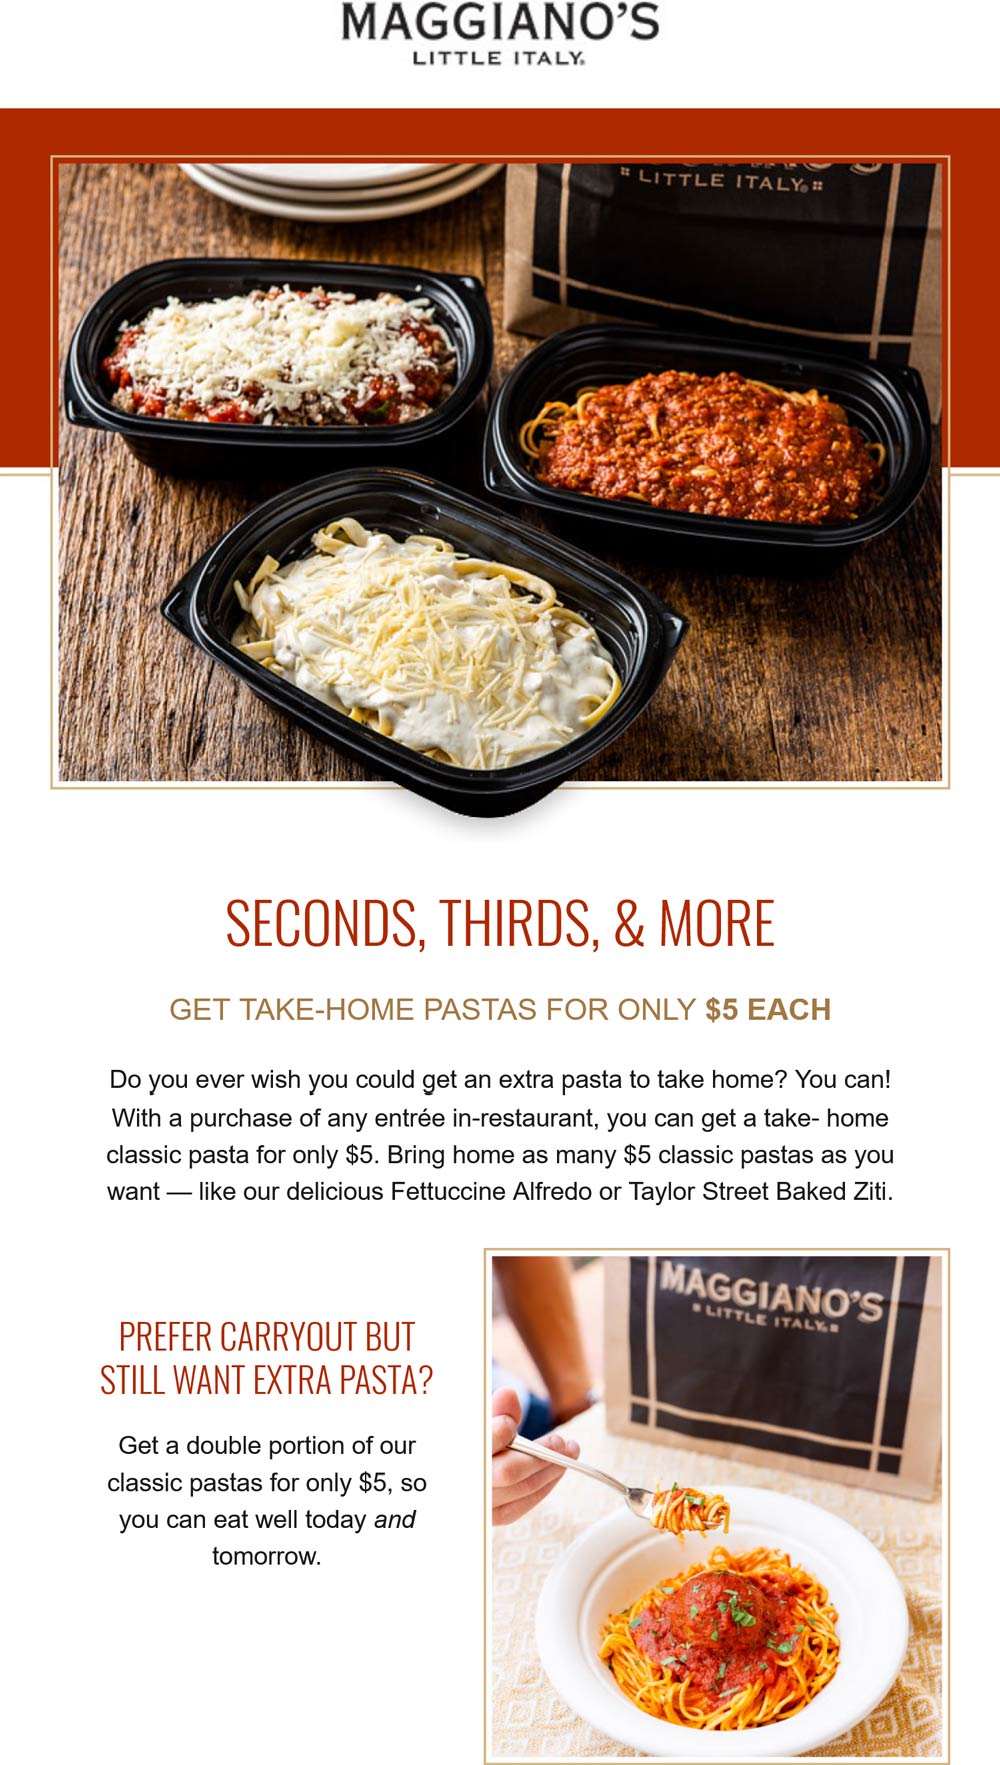 Maggianos Little Italy restaurants Coupon  Unlimited $5 takeout pastas with your dine-in entree at Maggianos Little Italy #maggianoslittleitaly 